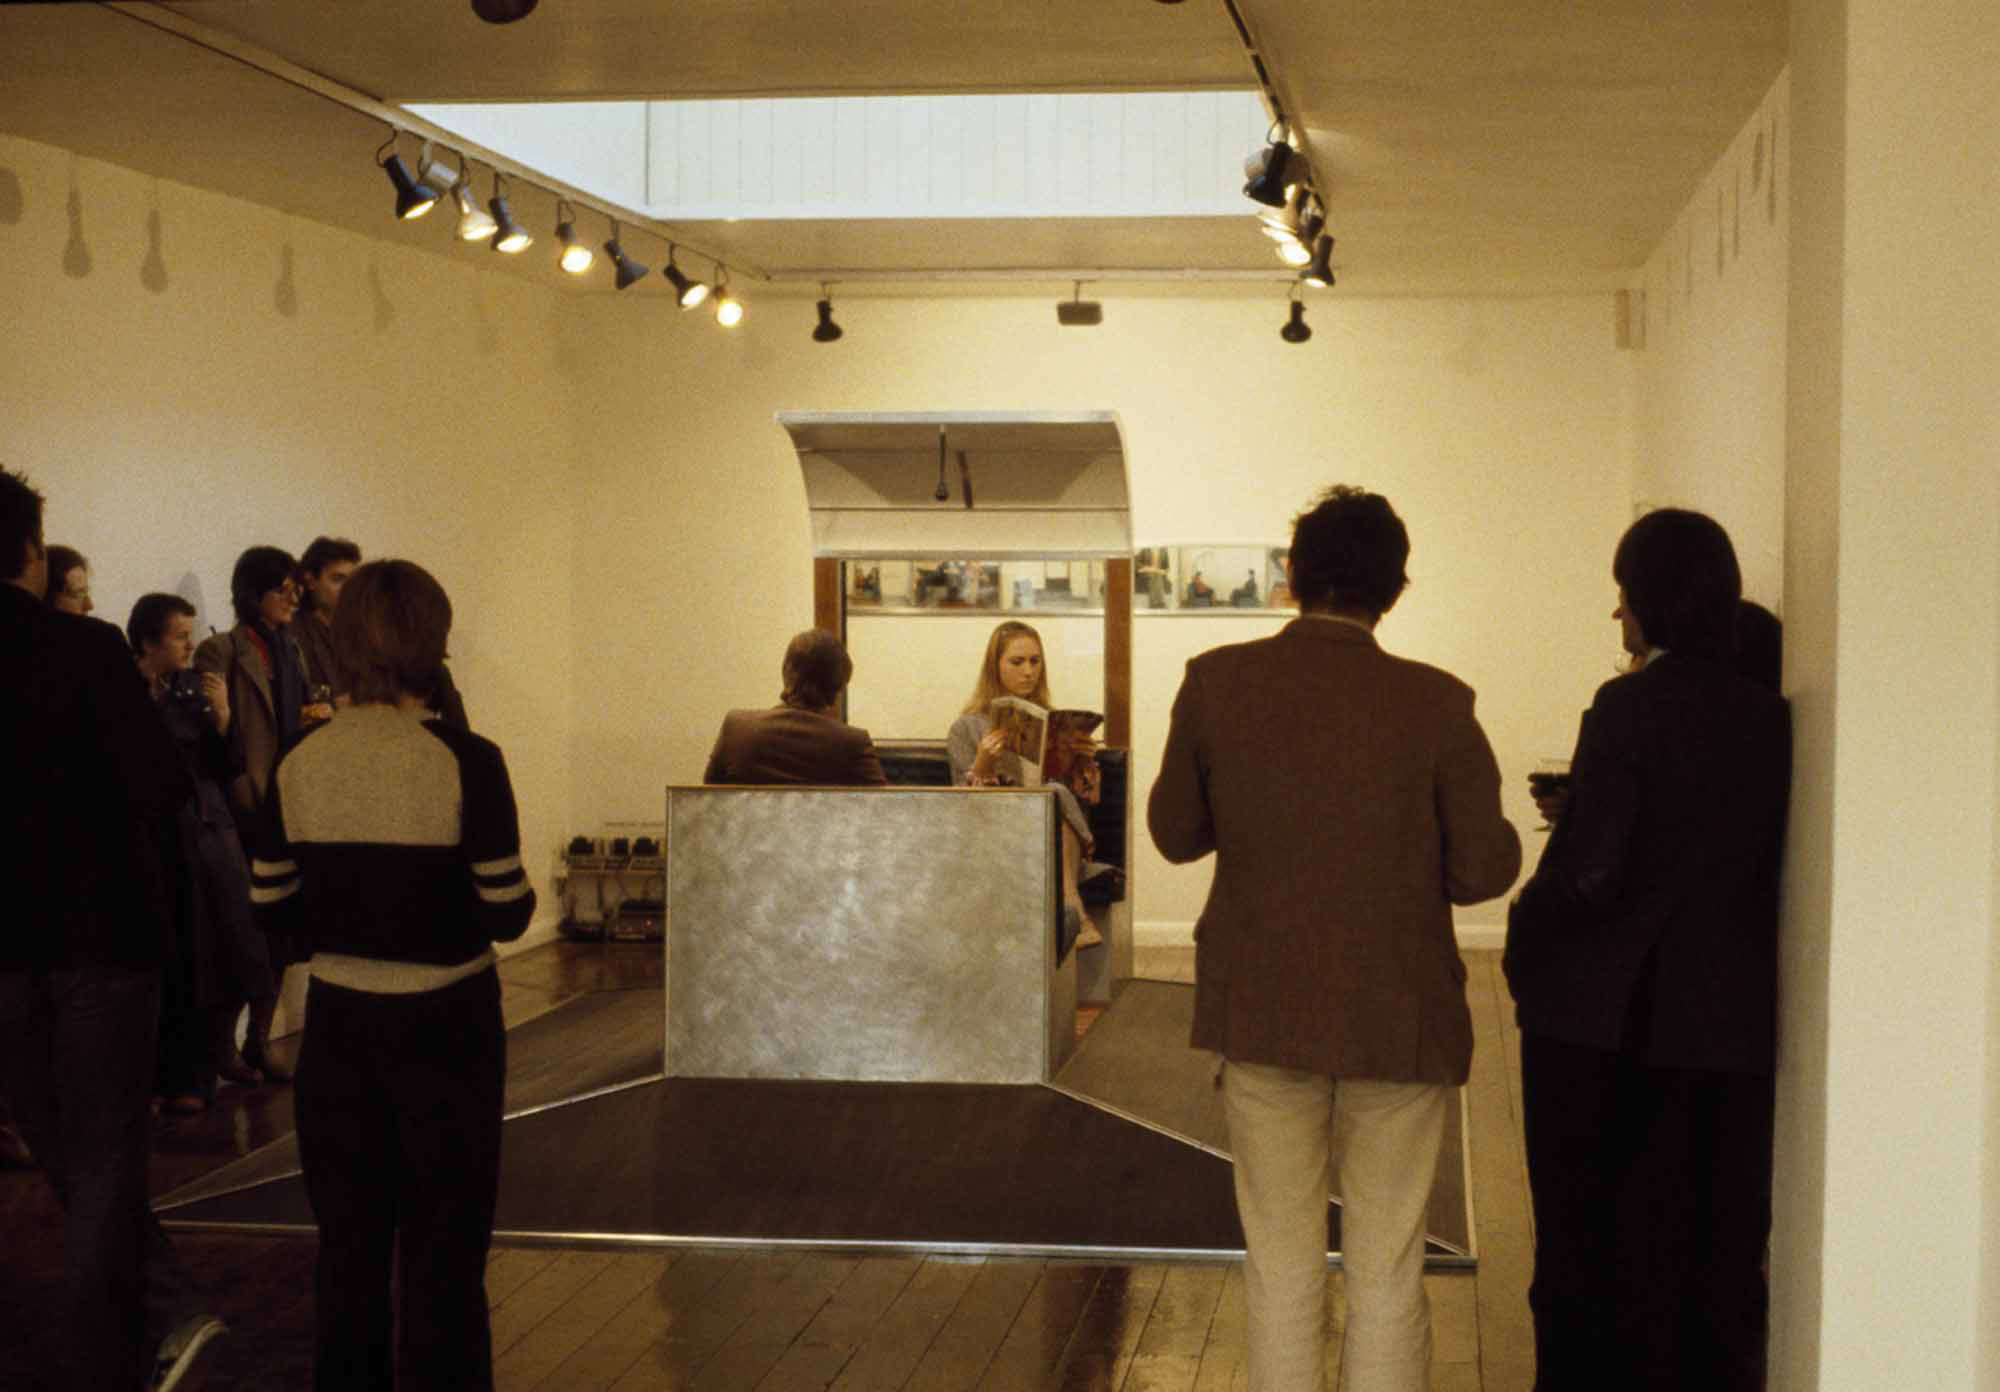 Helen Chadwick, Train of Thought at The Acme Gallery, London, (1978). Performed by Silvia Ziranek Courtesy Acme, Acme Archive.